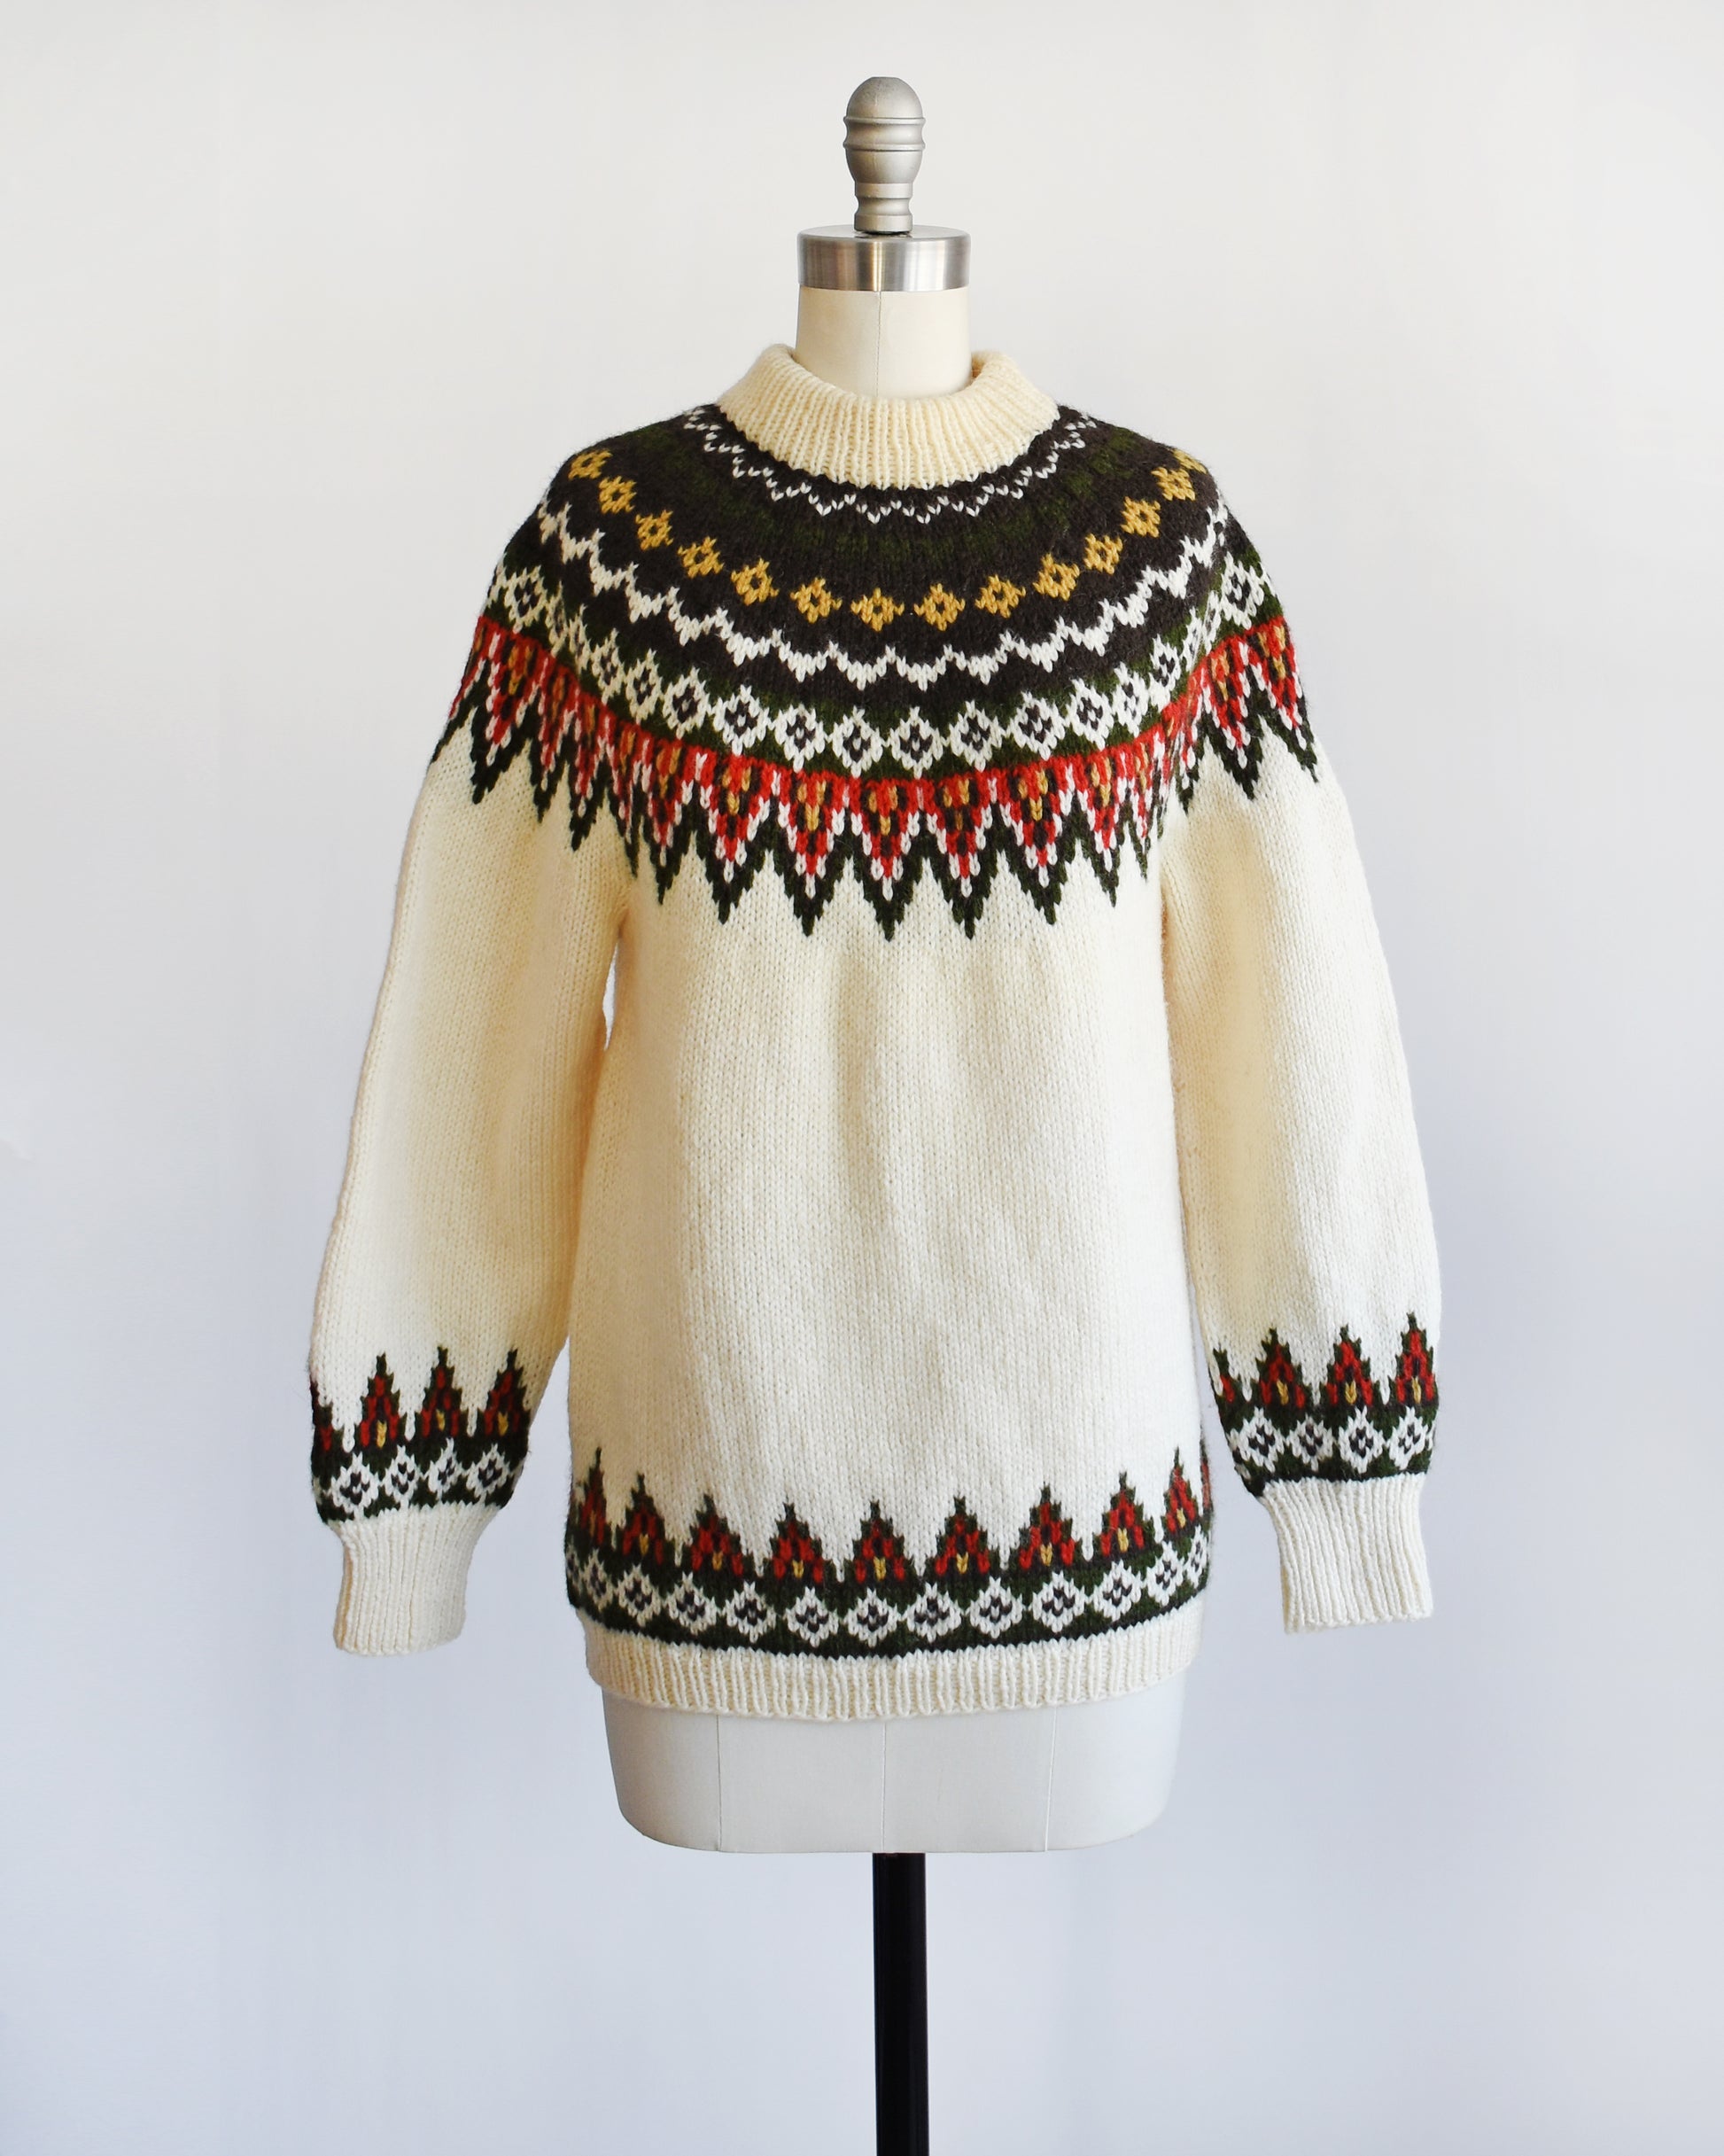 A vintage 1970s cream wool Nordic sweater with a brown, dark green, yellow, and red orange Fair Isle pattern around the collar and complimentary pattern on the hem and cuffs.